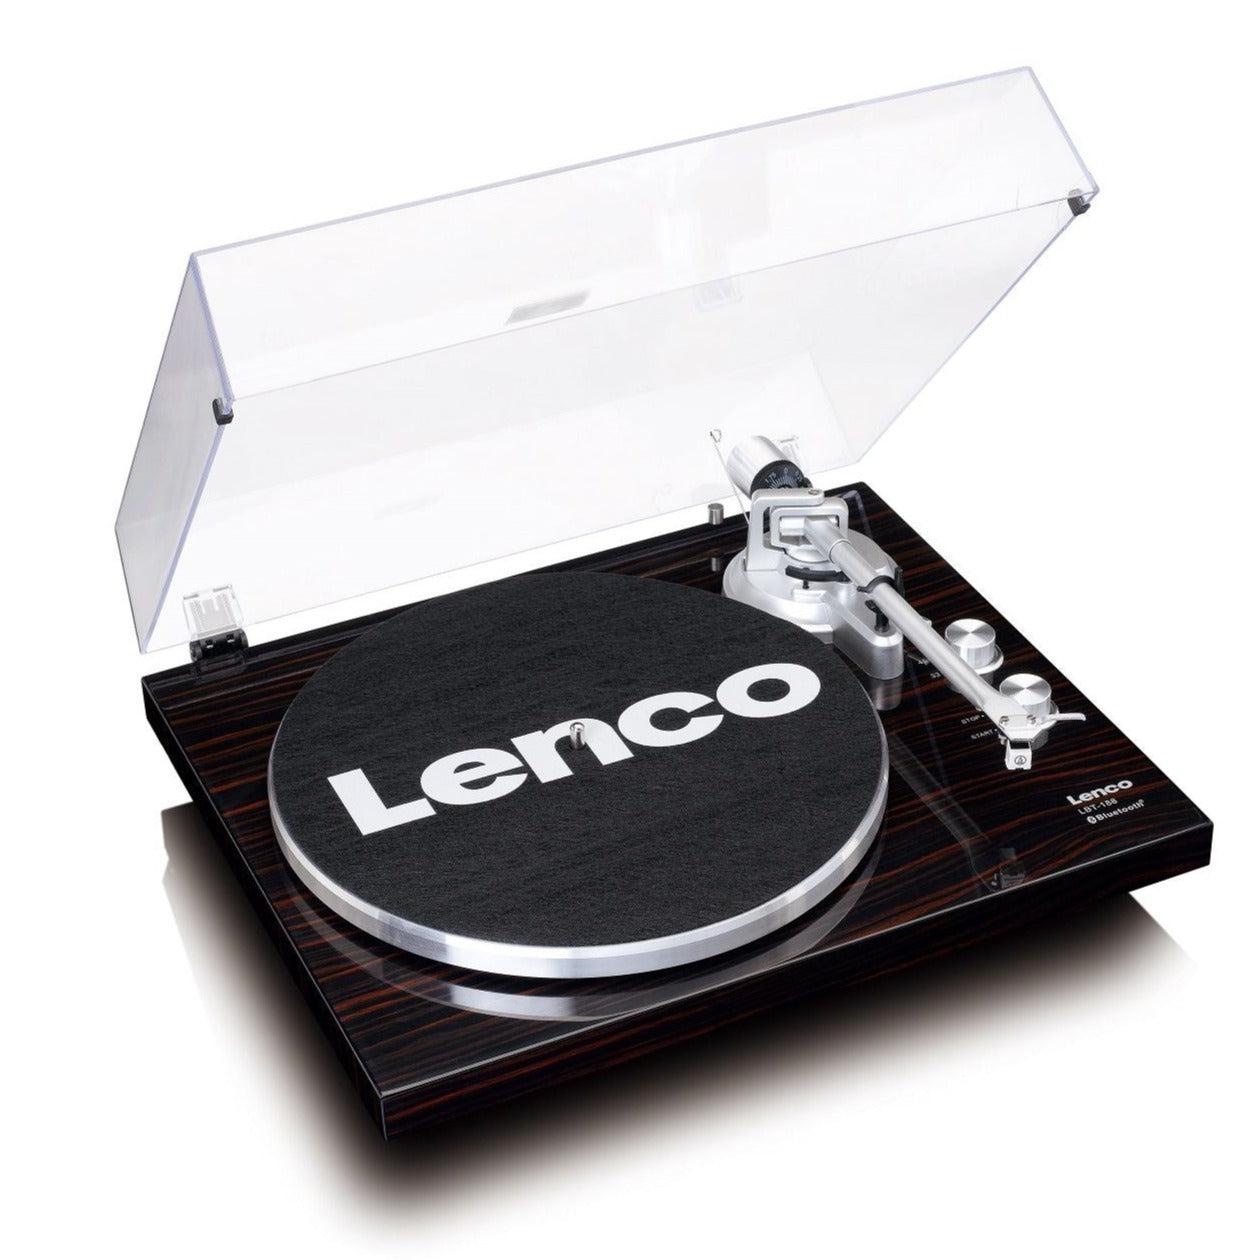 Lenco LBT-188 Record Player with Bluetooth and USB Output for Vinyl to MP3